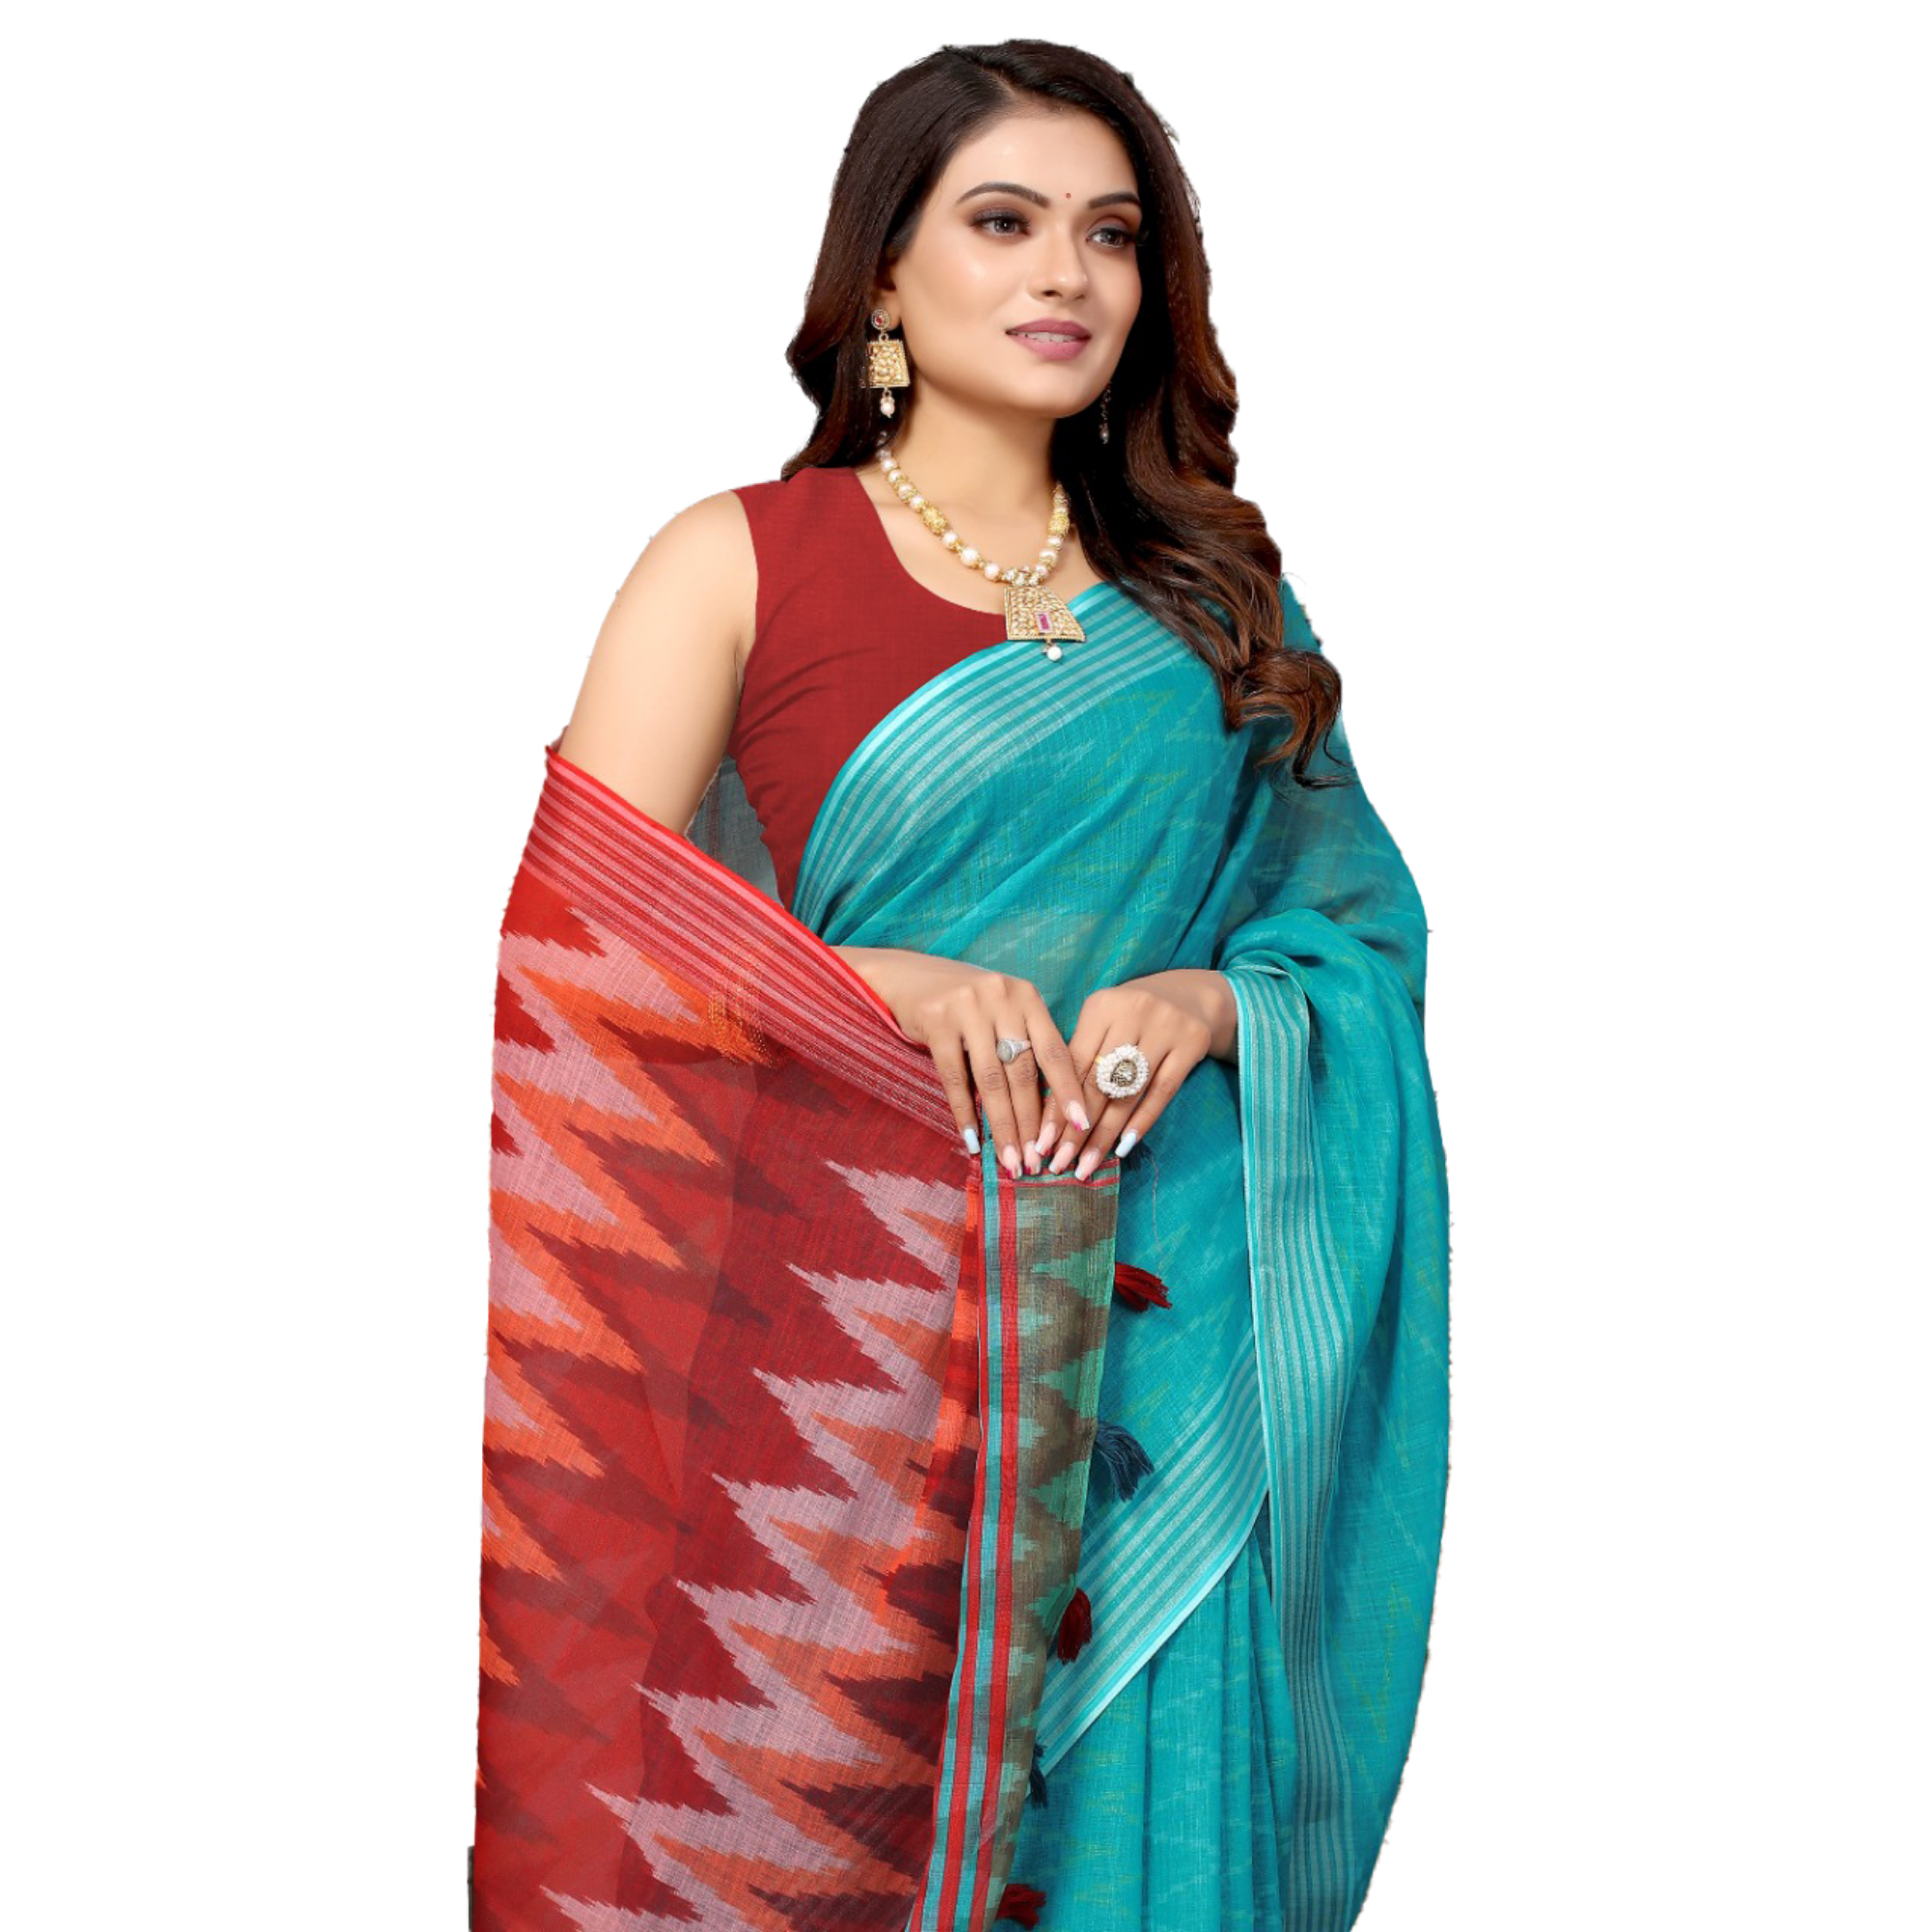 Women's Linen Sky-blue Saree with stripped silver border and multicolor zig-zag Pallu - TheHangr